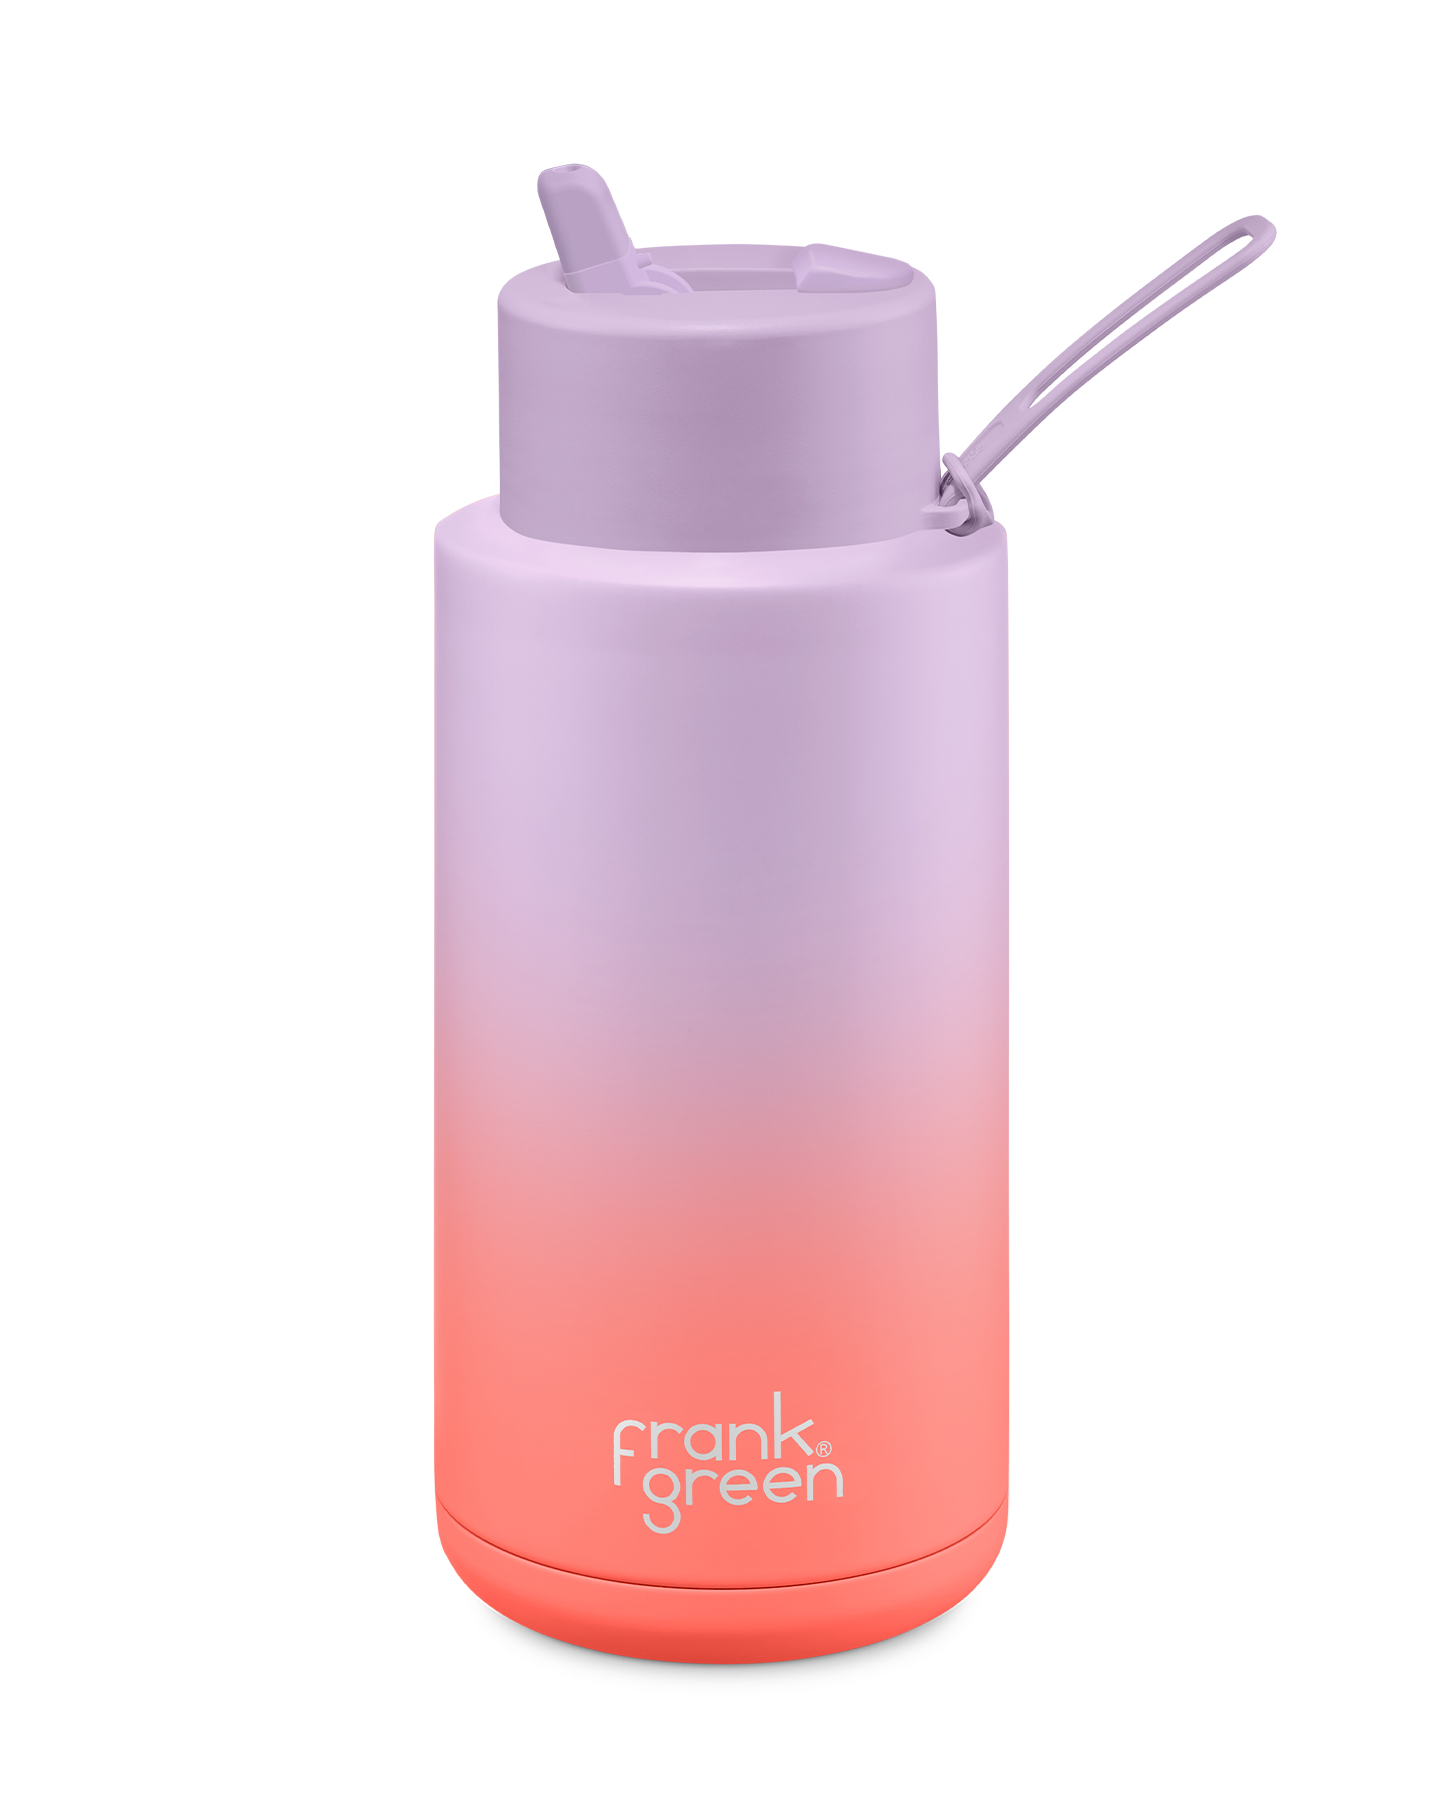 Frank Green Gradient Ceramic Reusable Bottle 34oz/1 LITRE WITH STRAW LID - Lilac Haze/Living Coral